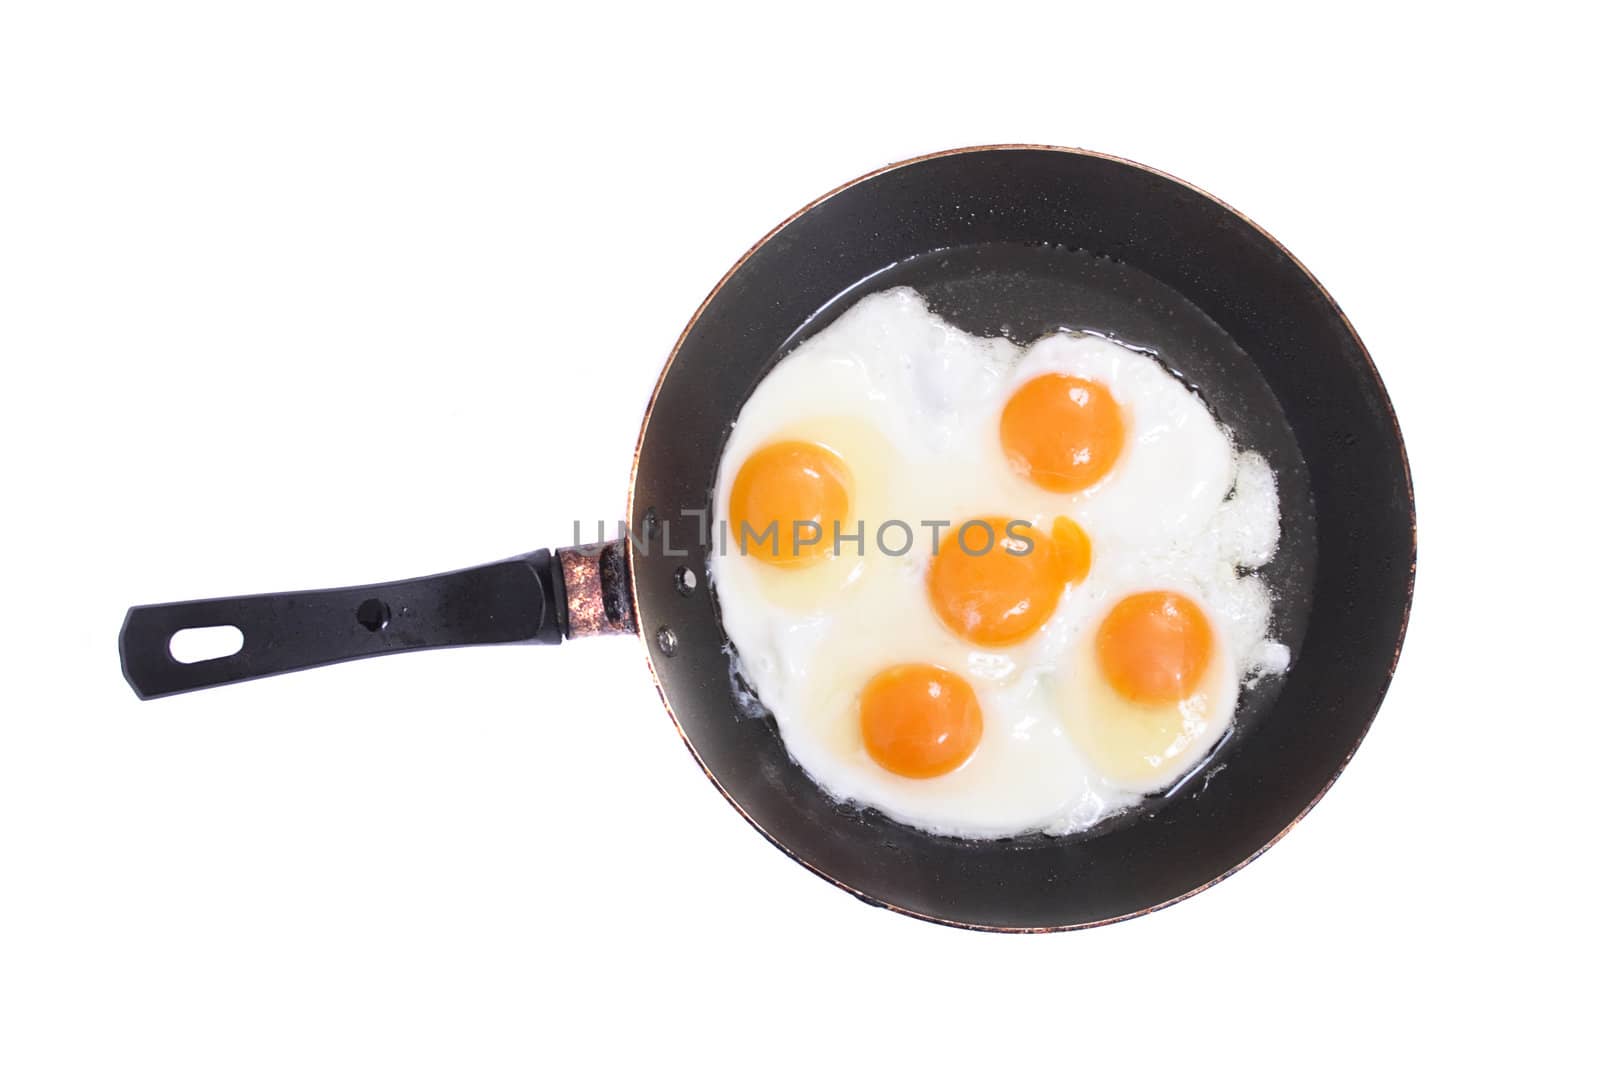 fried eggs on the pan on the whte background